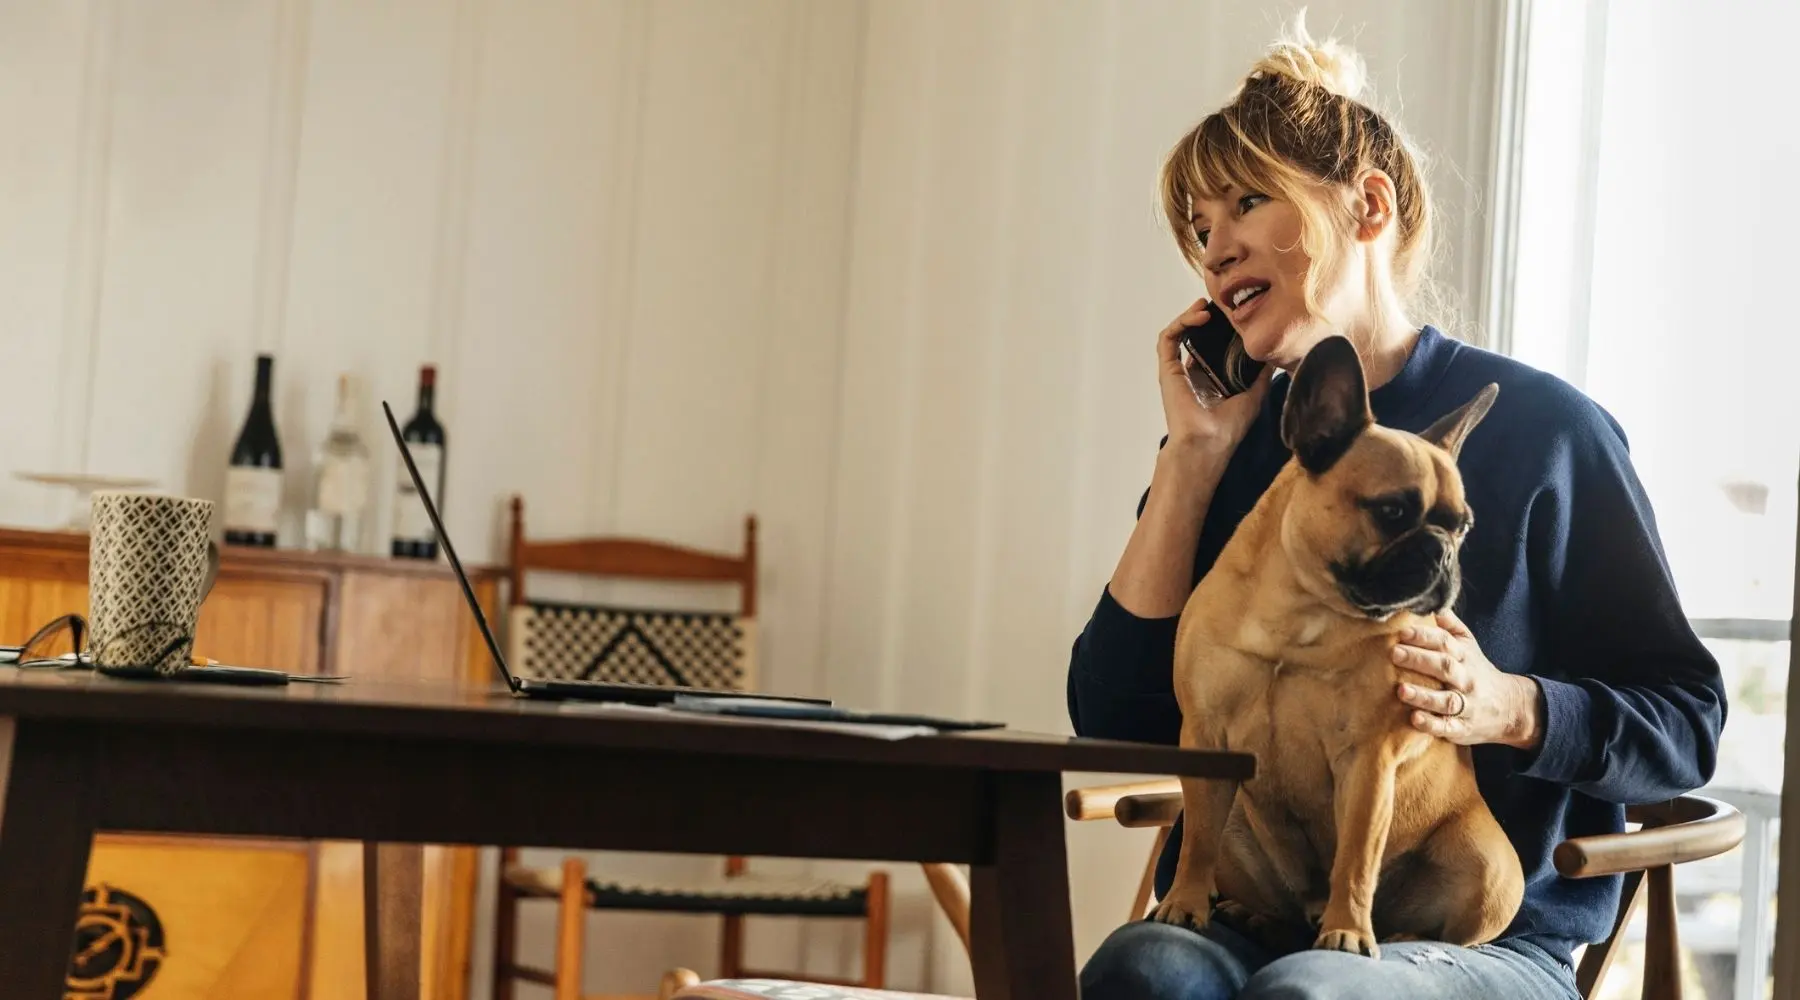 A woman talks on the phone with her dog sitting on her lap.